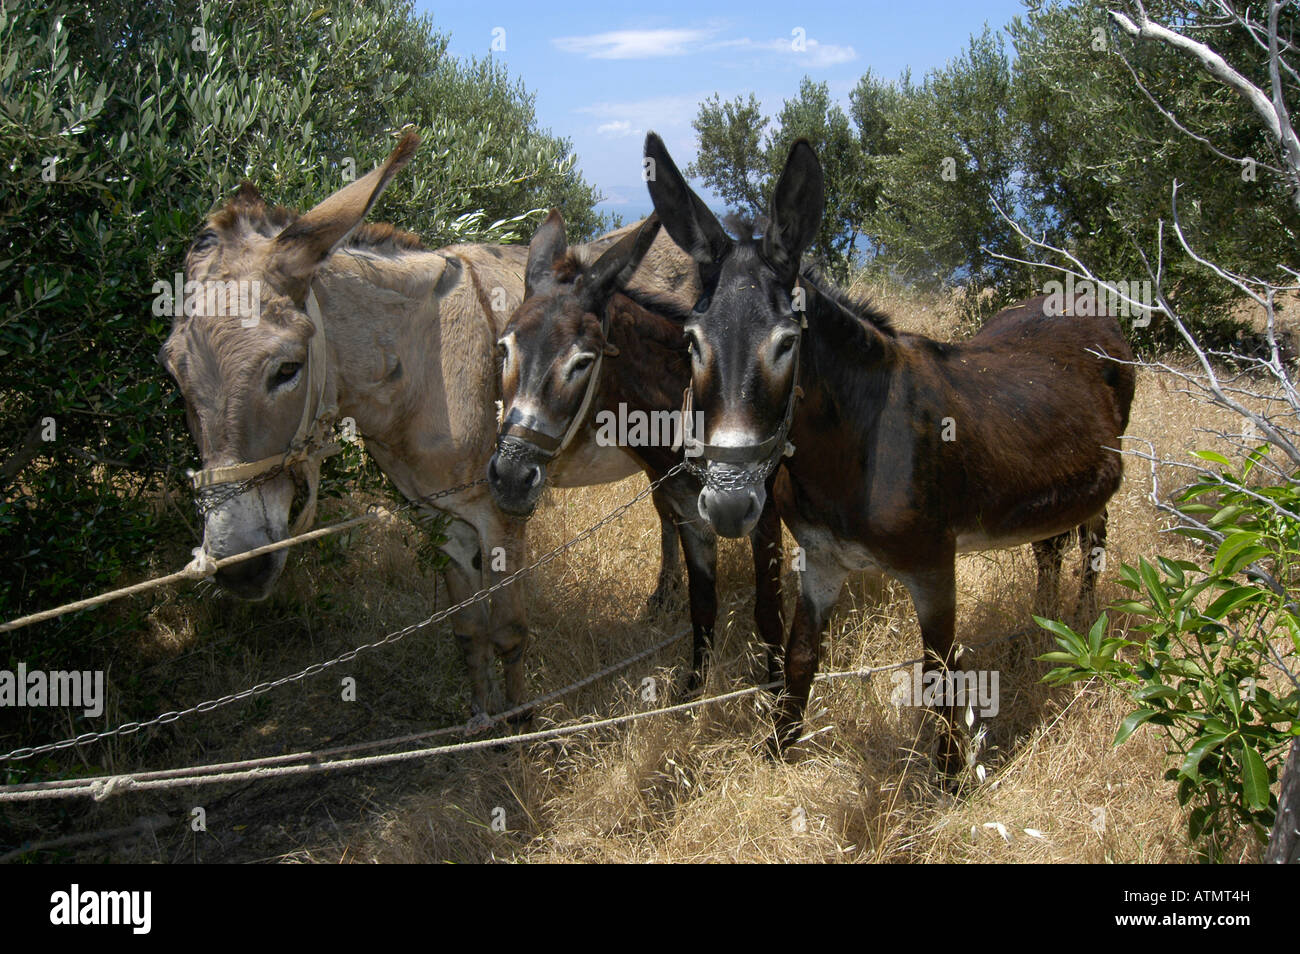 Three donkeys in a field of olive tries greece Stock Photo